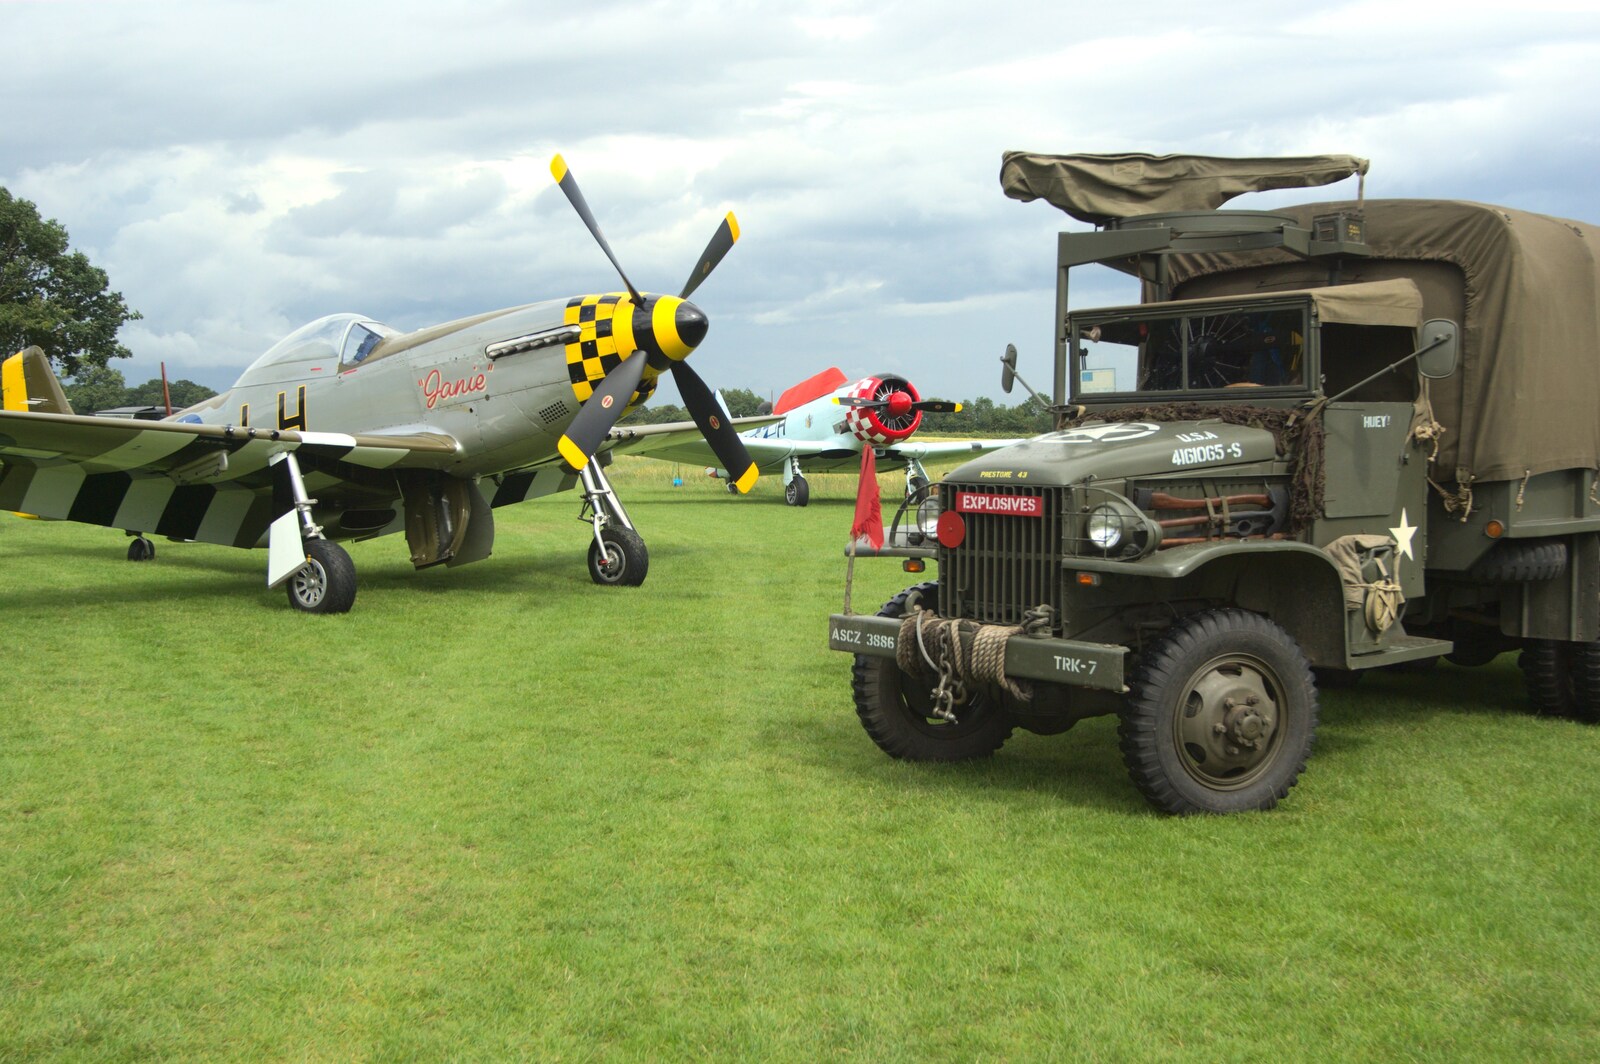 Janie, the Harvard and a US-Army truck from Nosher Flies in a P-51D Mustang, Hardwick Airfield, Norfolk (and the Whole of Suffolk) - 17th July 2011